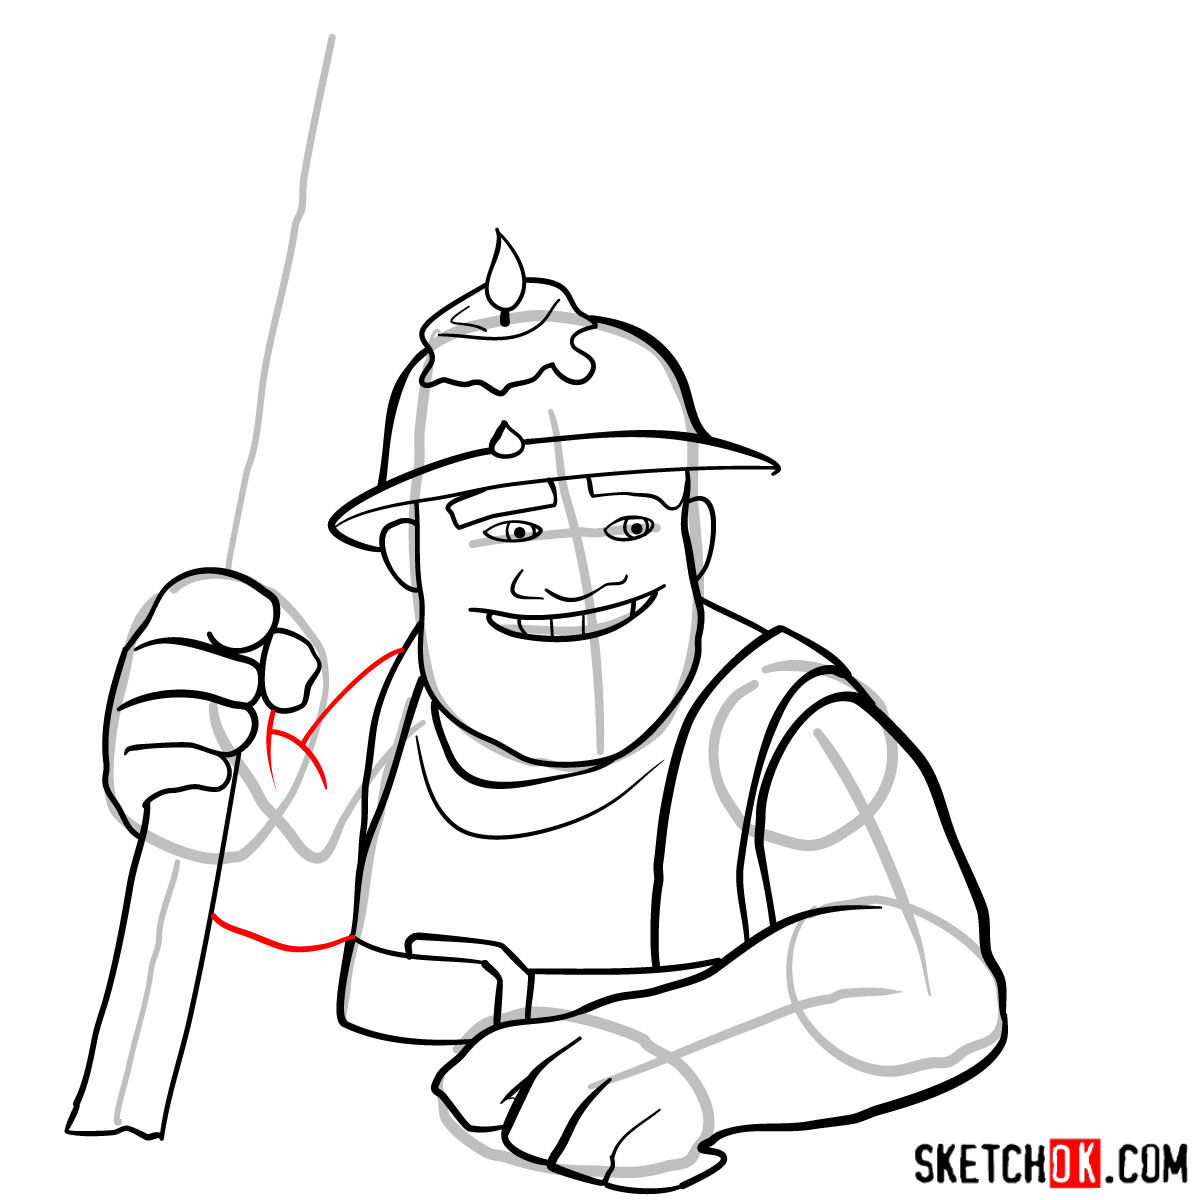 How to draw Miner from Clash of Clans game - step 10